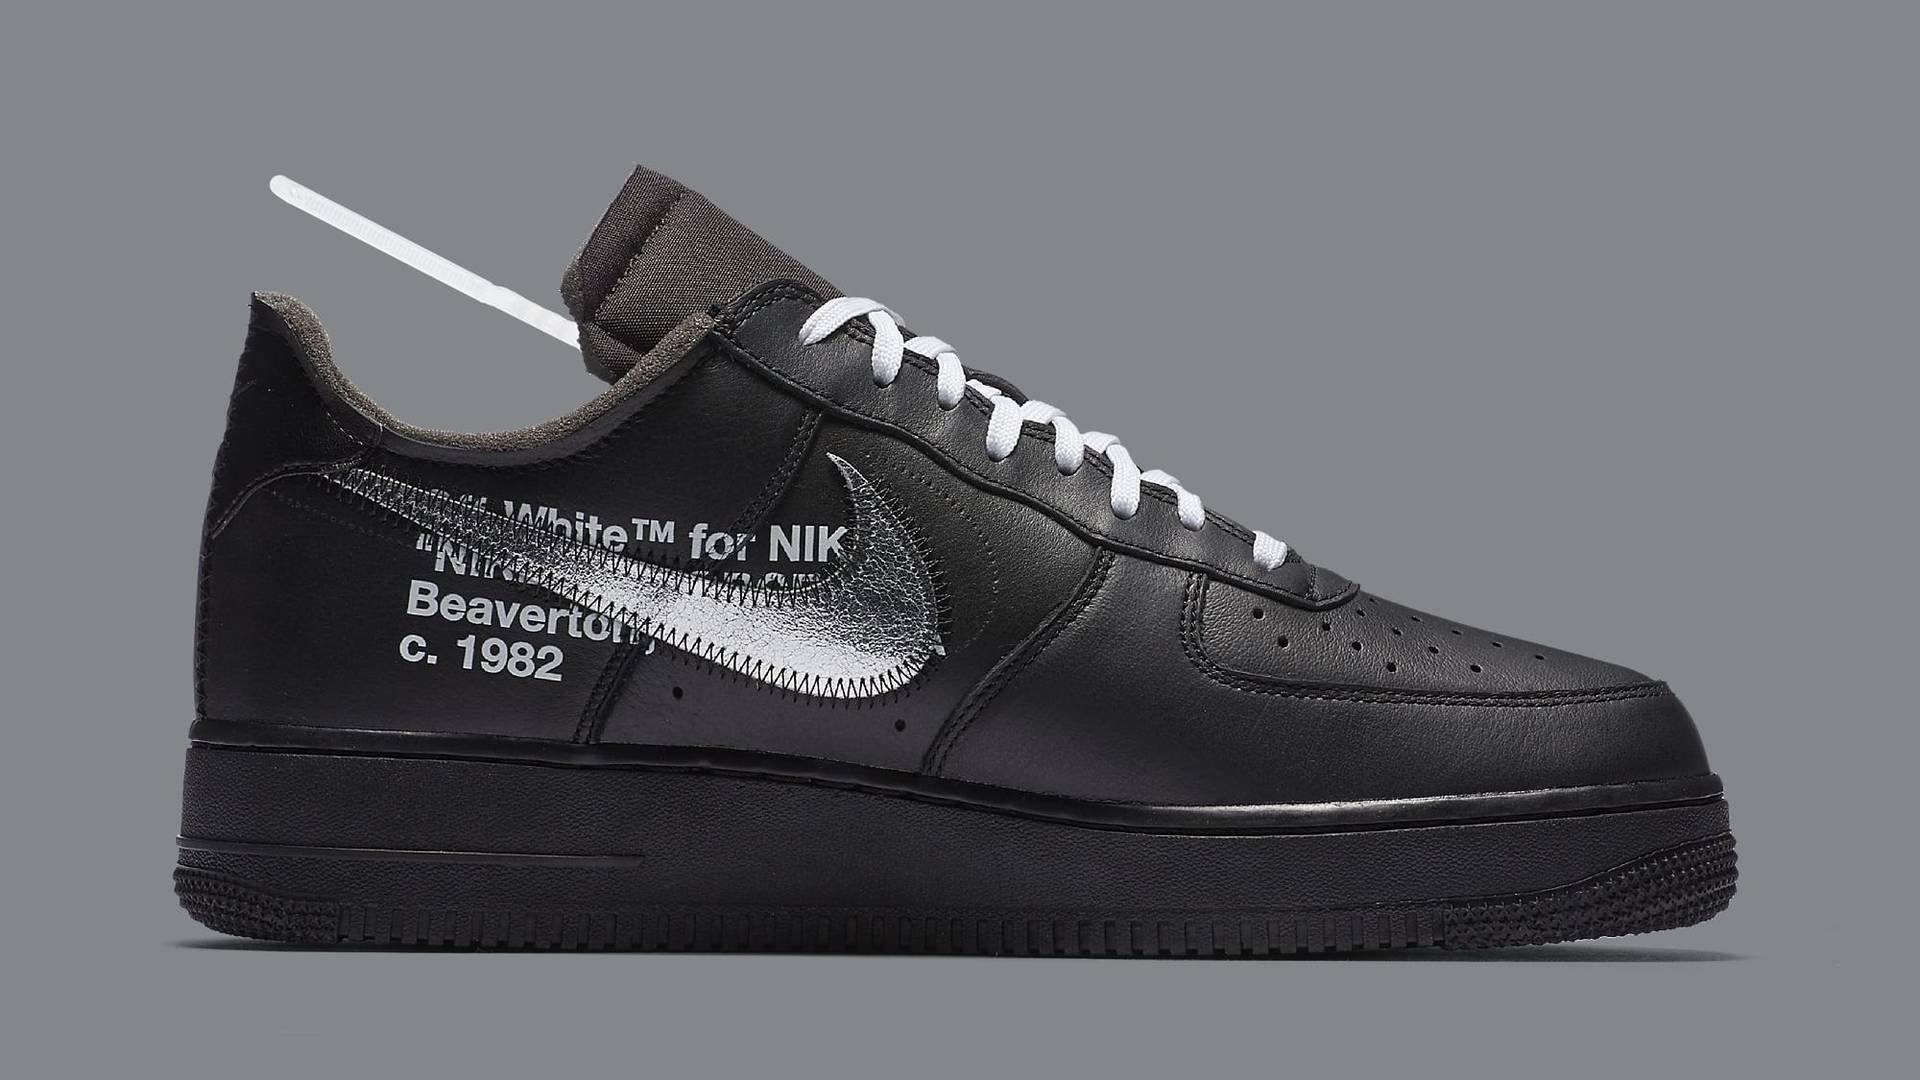 Off White X Nike AF1 Low MoMa Image Surface, Sparking Release